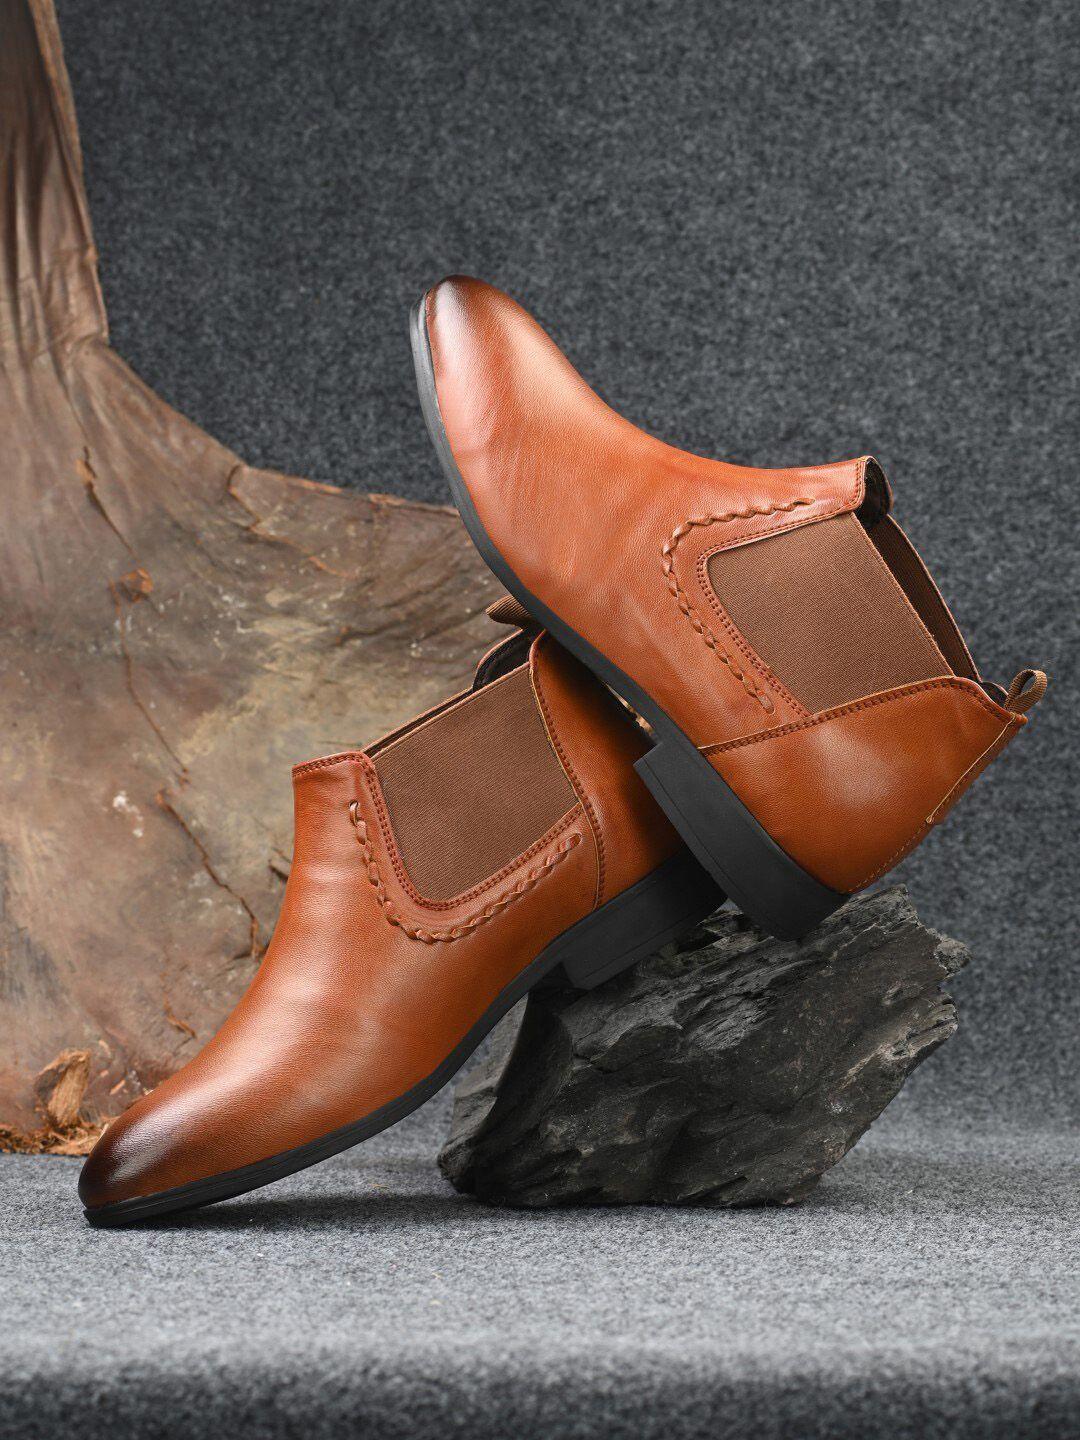 the roadster lifestyle co. men mid-top chelsea boots